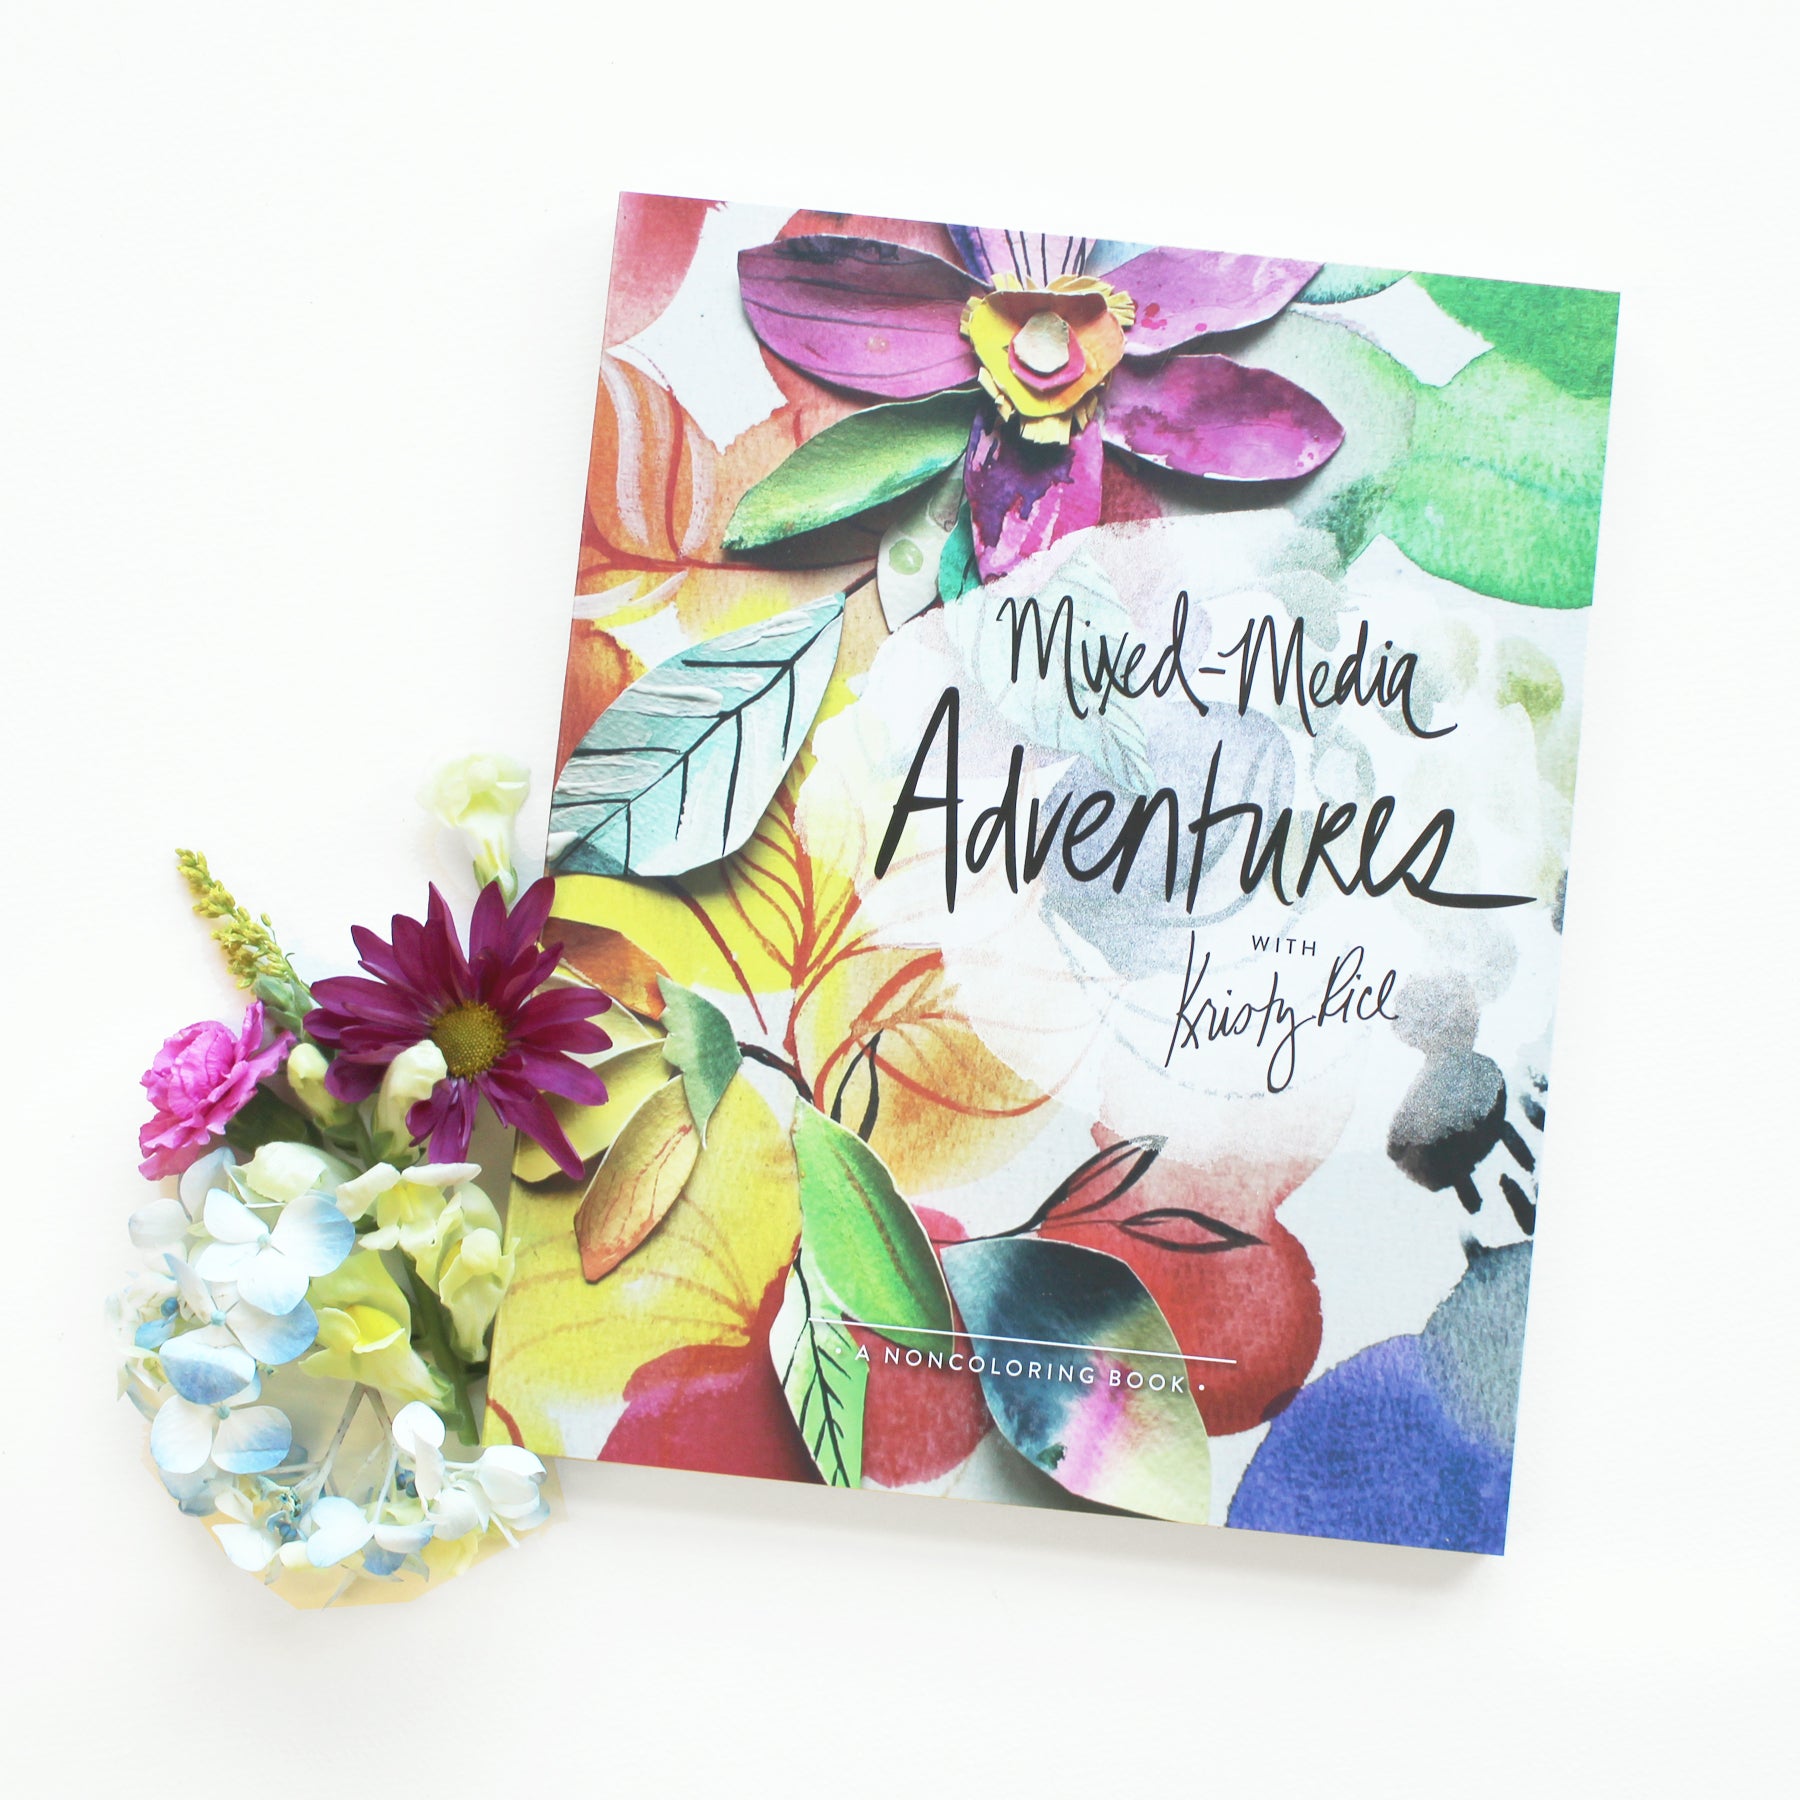 Mixed-Media Adventures with Kristy Rice: A Noncoloring Book [Book]